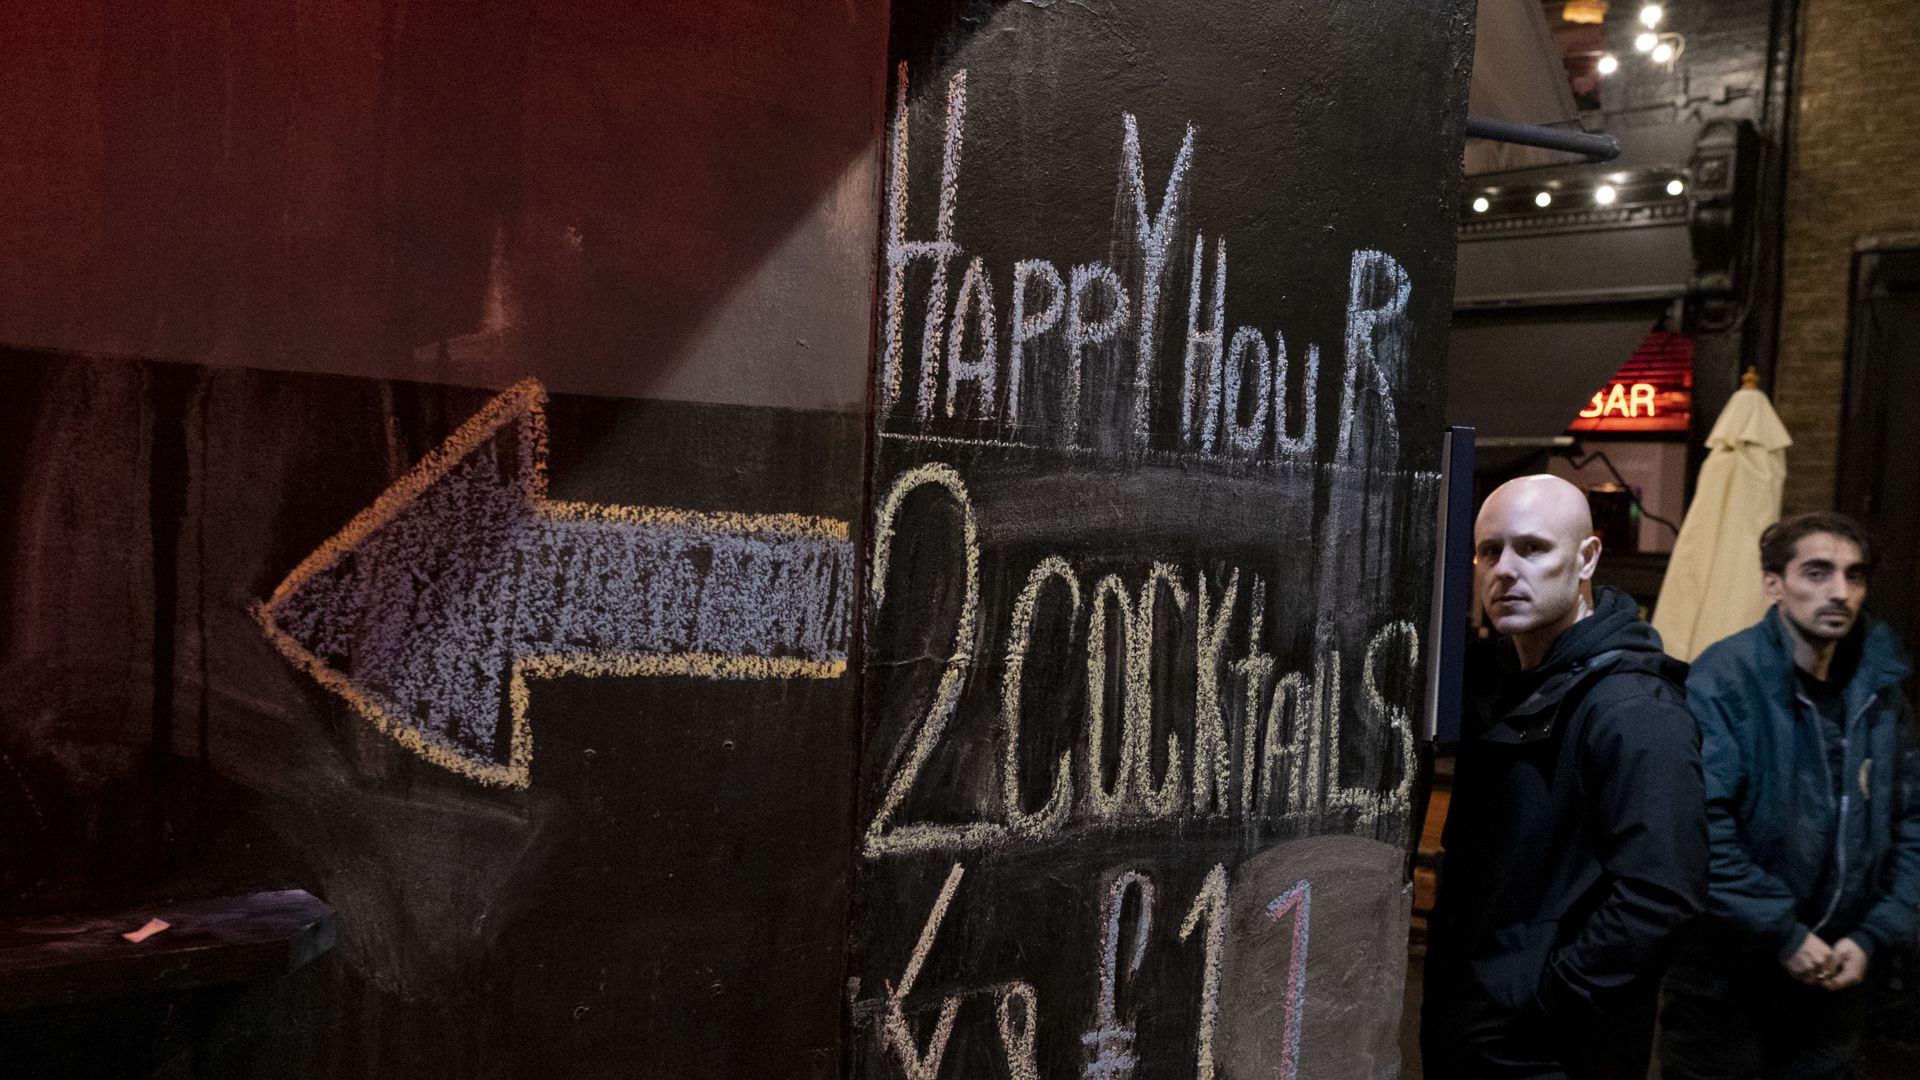 A sign advertising happy hour discounted drinks.